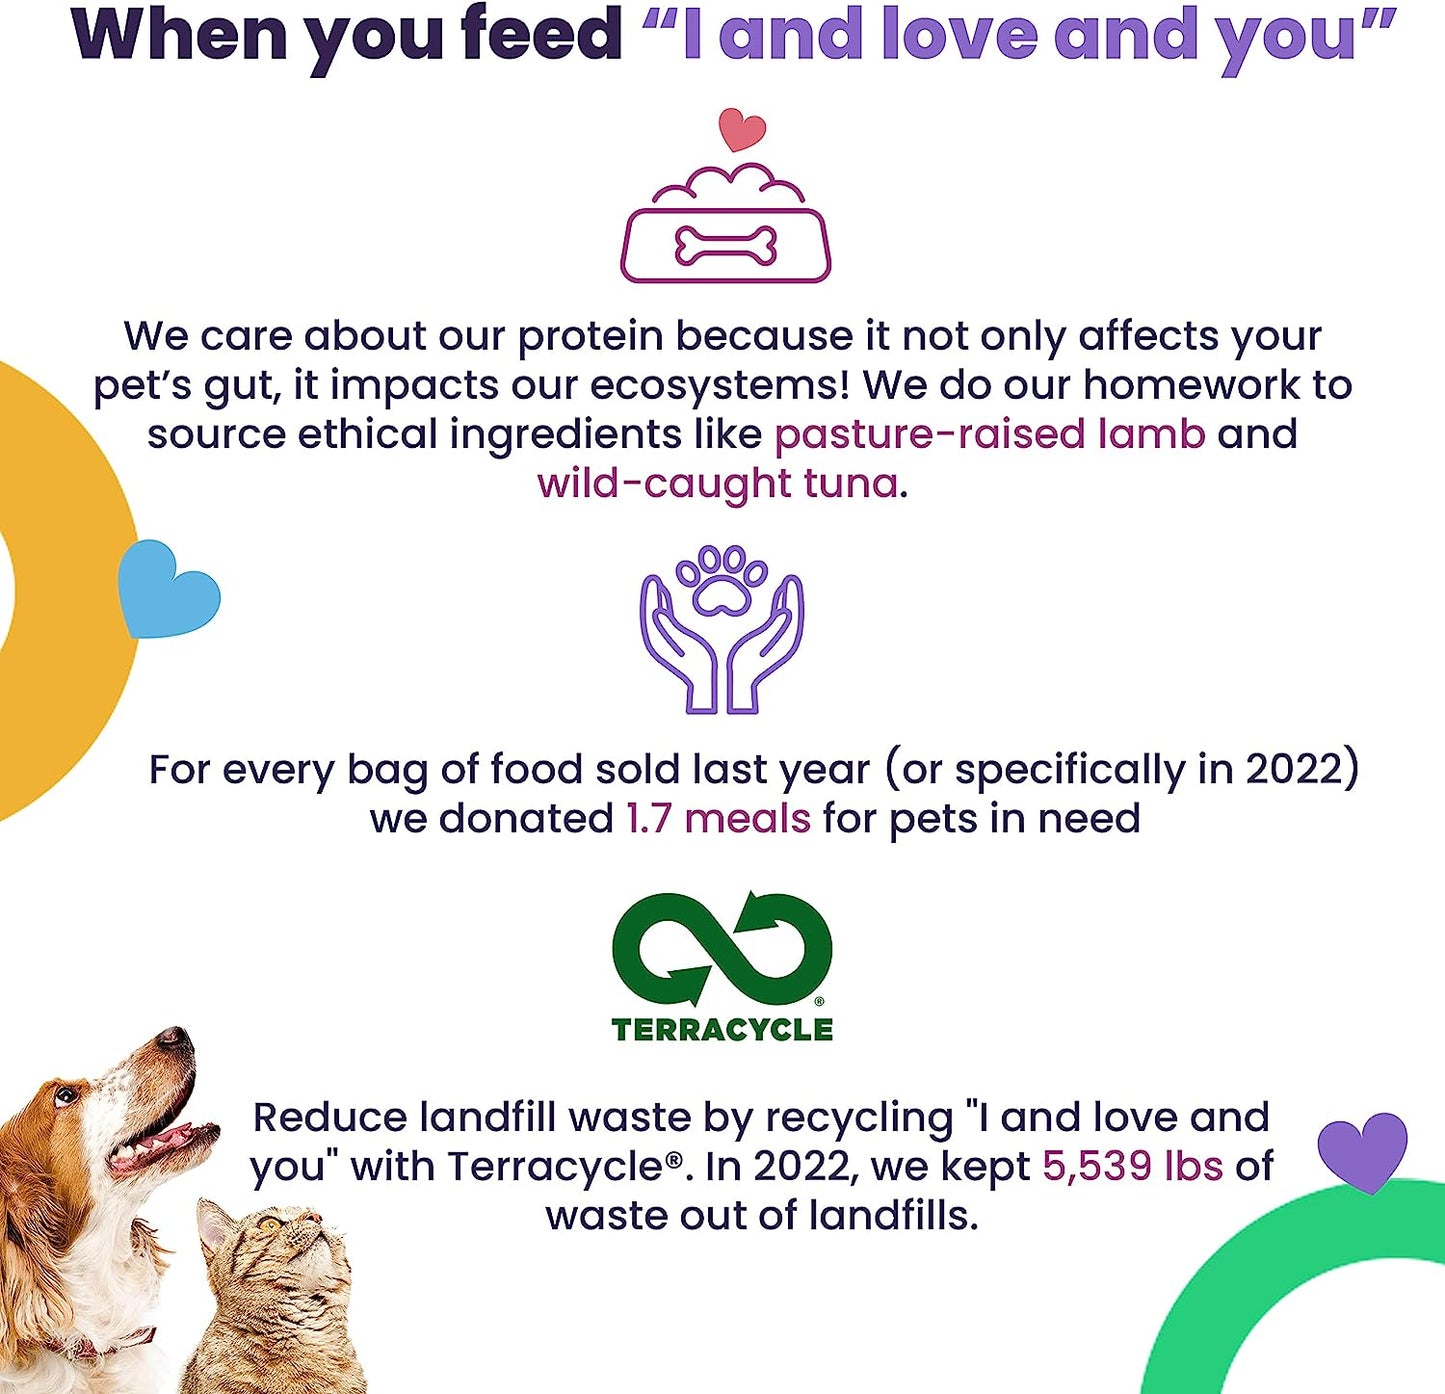 "I and Love and You" Lovingly Simple Dry Cat Food, Salmon and Sweet Potato Recipe, Limited Ingredient Formula, Poultry Free, for Allergies and Healthy Skin, Grain Free, 3.4Lb Bag